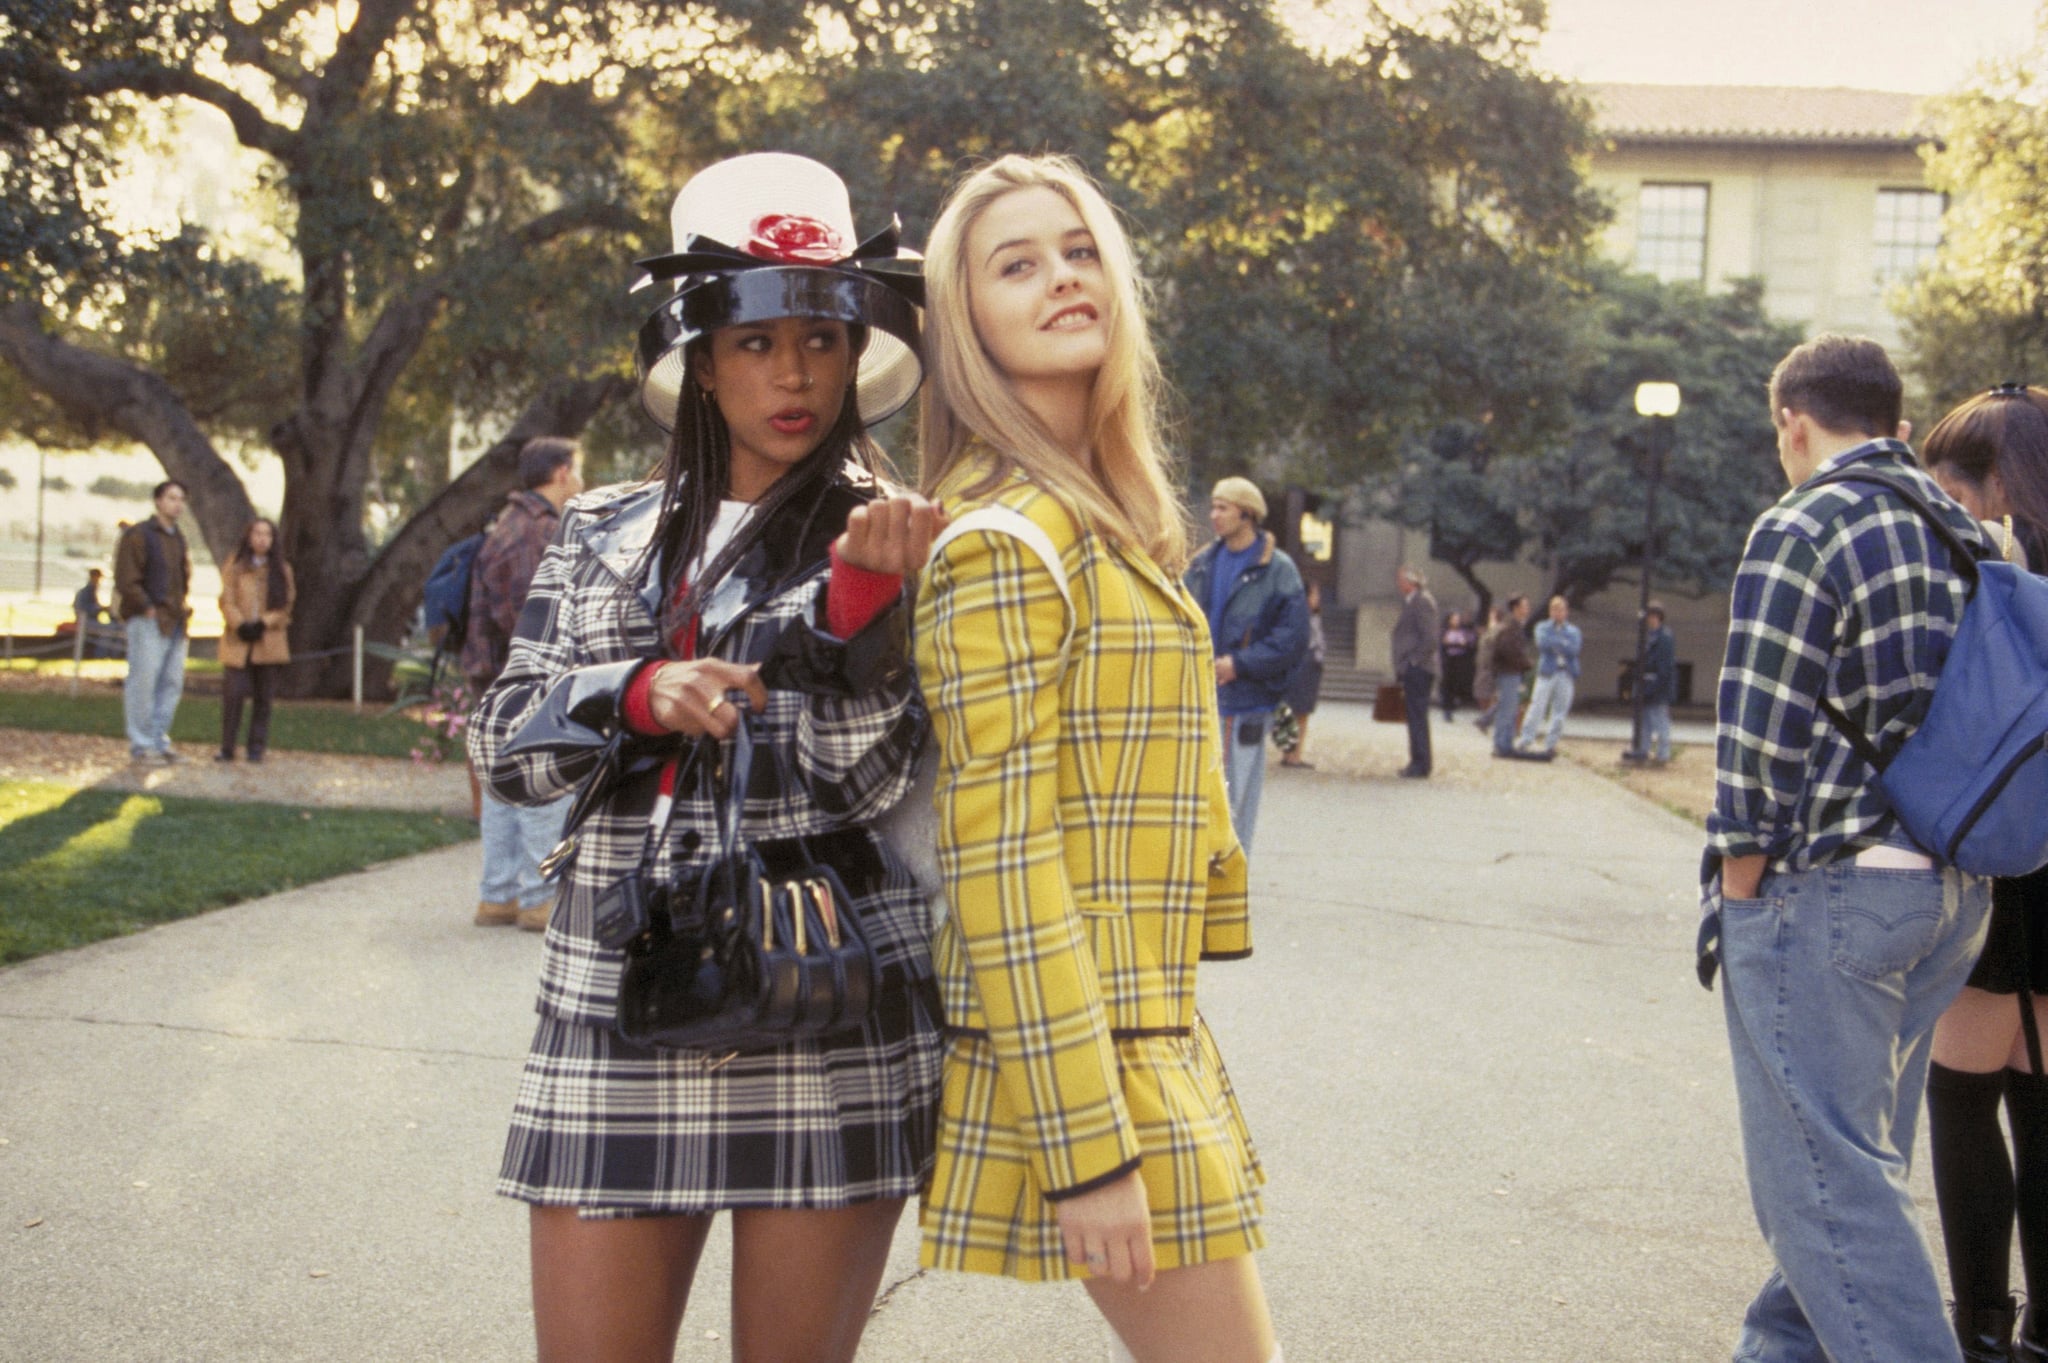 CLUELESS, Stacey Dash, Alicia Silverstone, 1995, (c) Paramount/courtesy Everett Collection